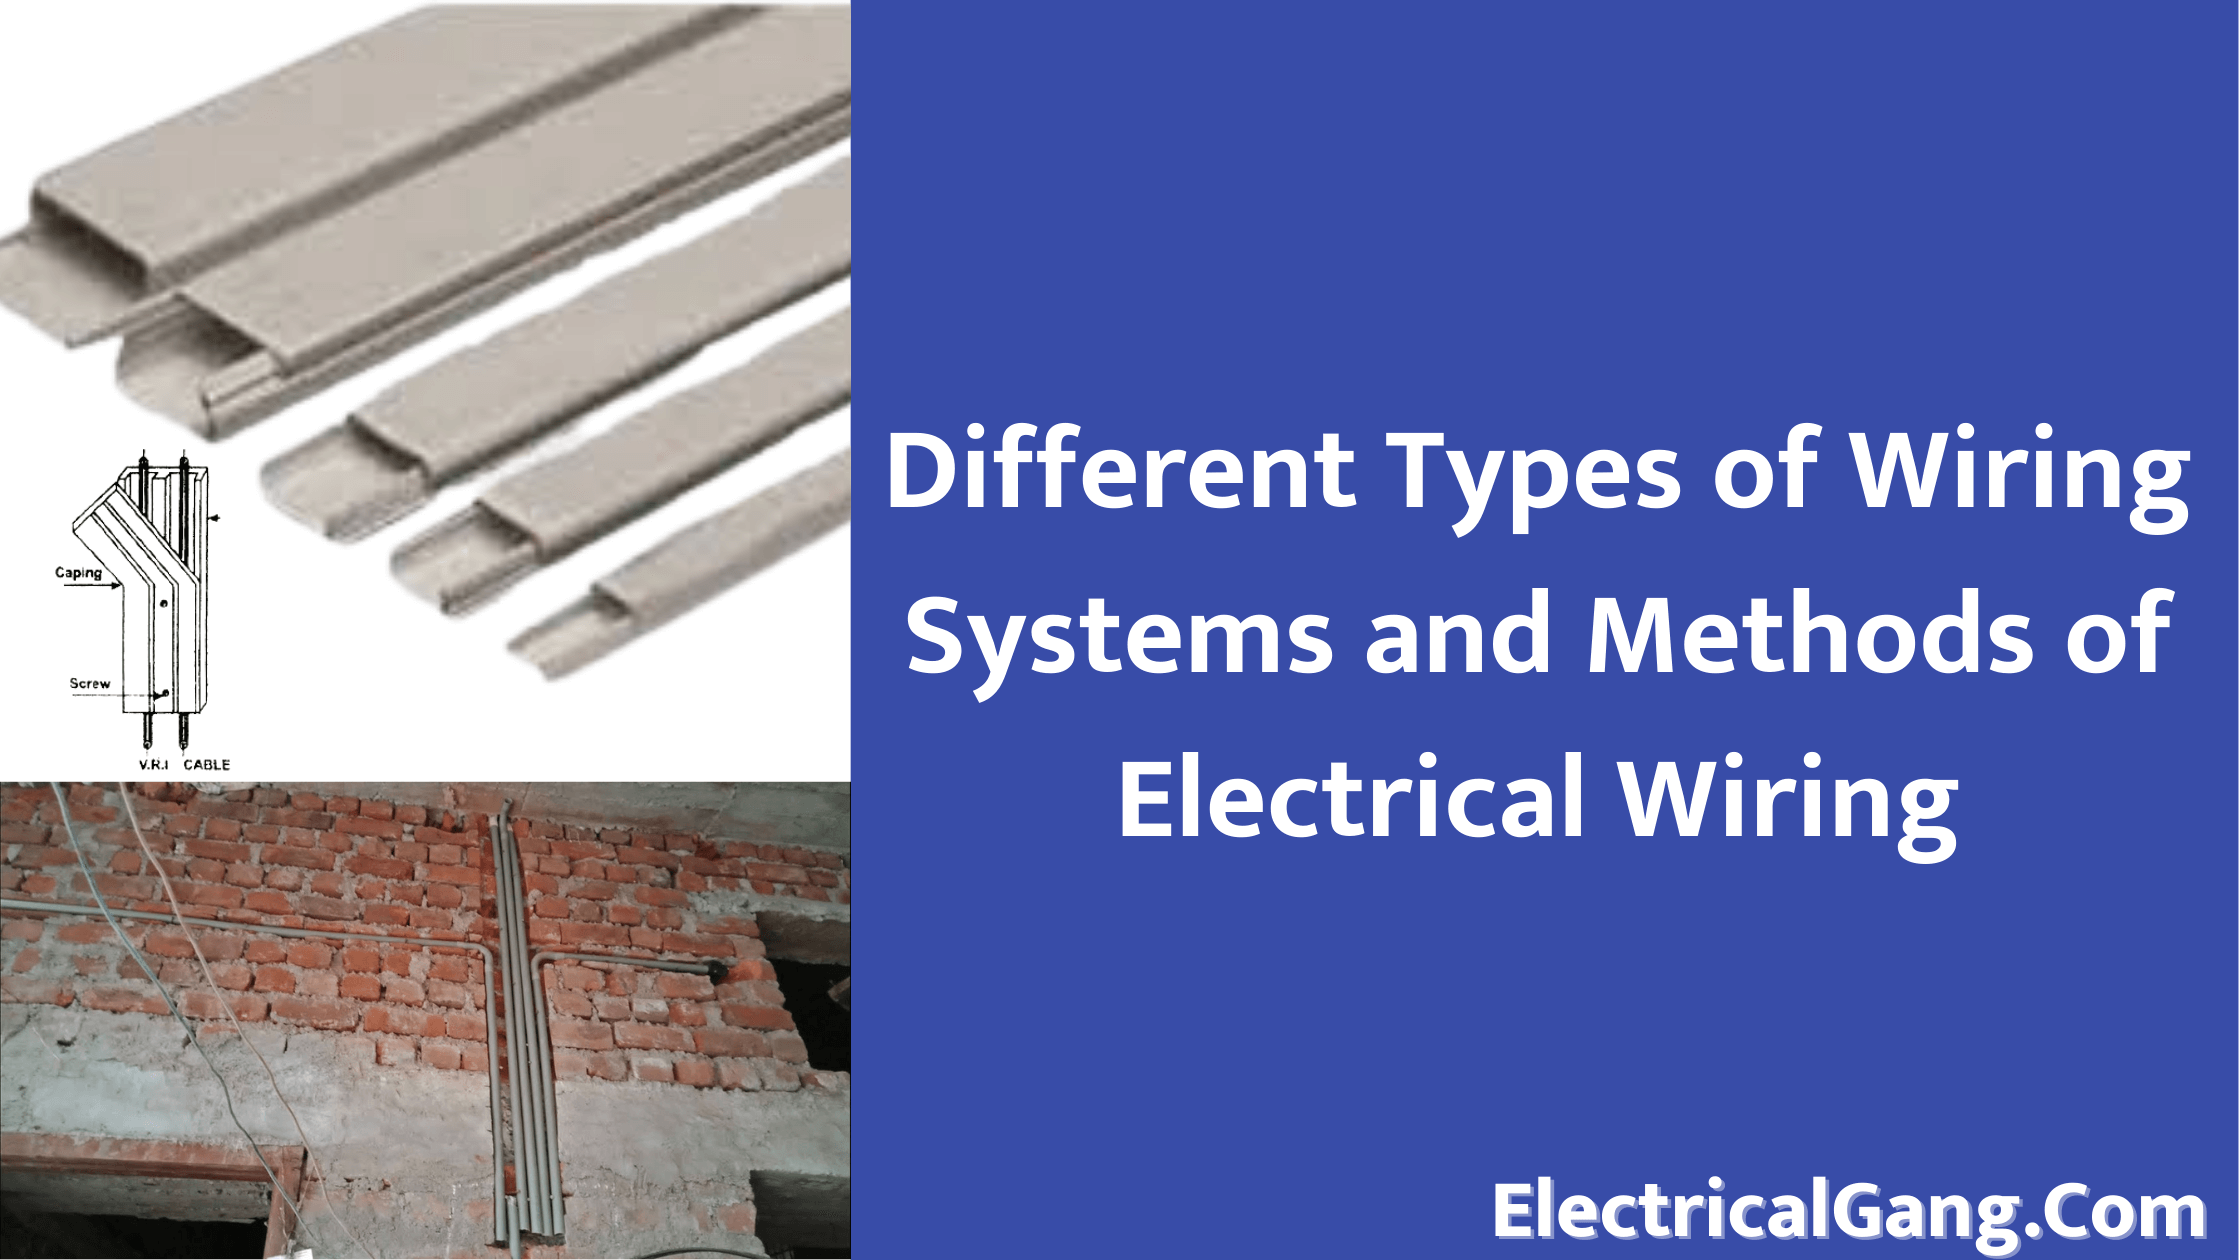 Exploring the Different Types of Wiring for Domestic Use